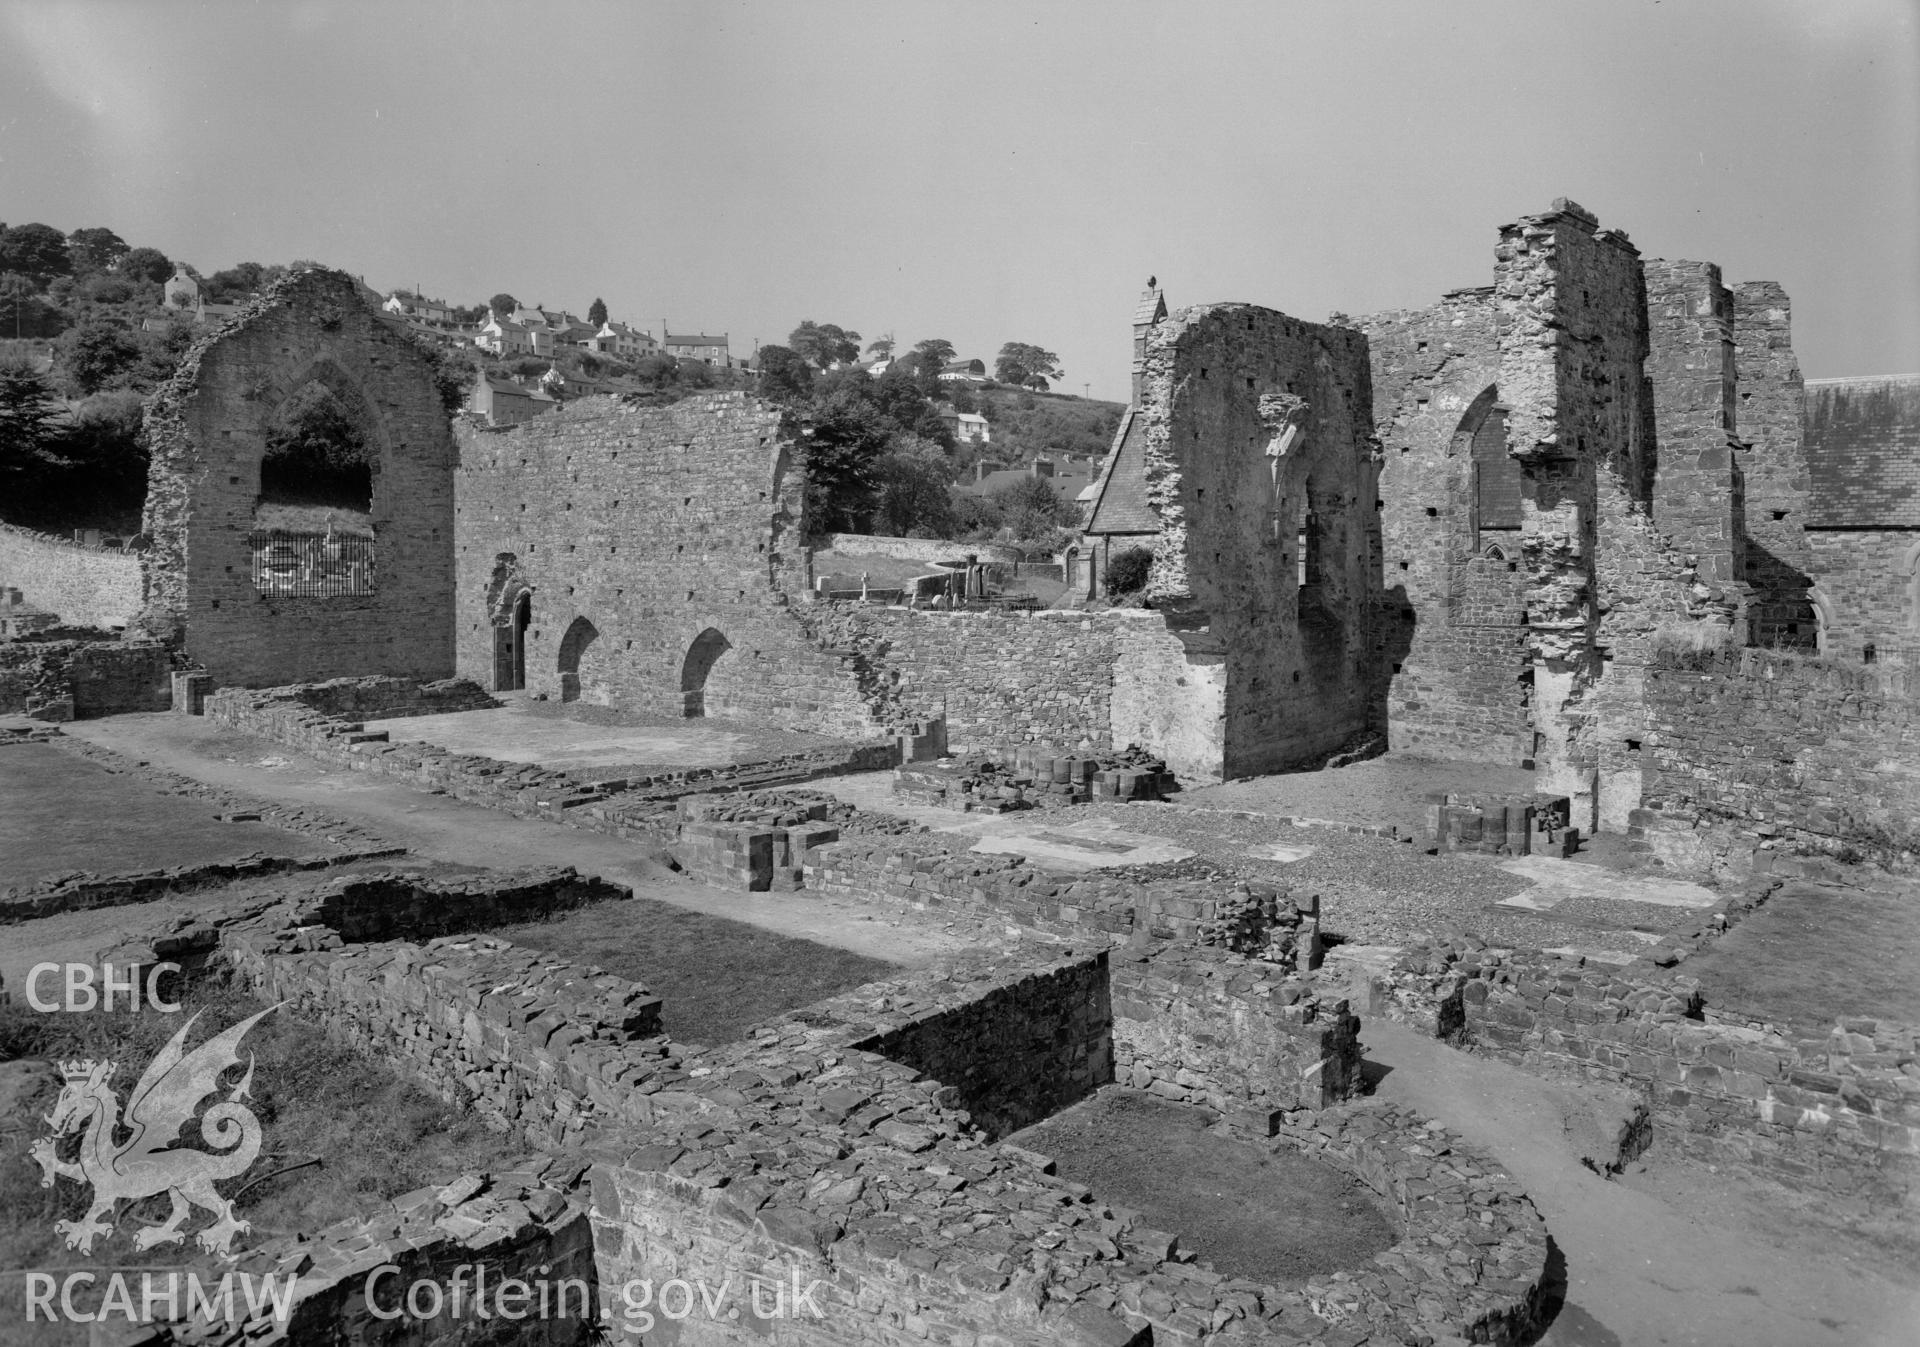 D.O.E photograph of St Dogmaels Abbey.